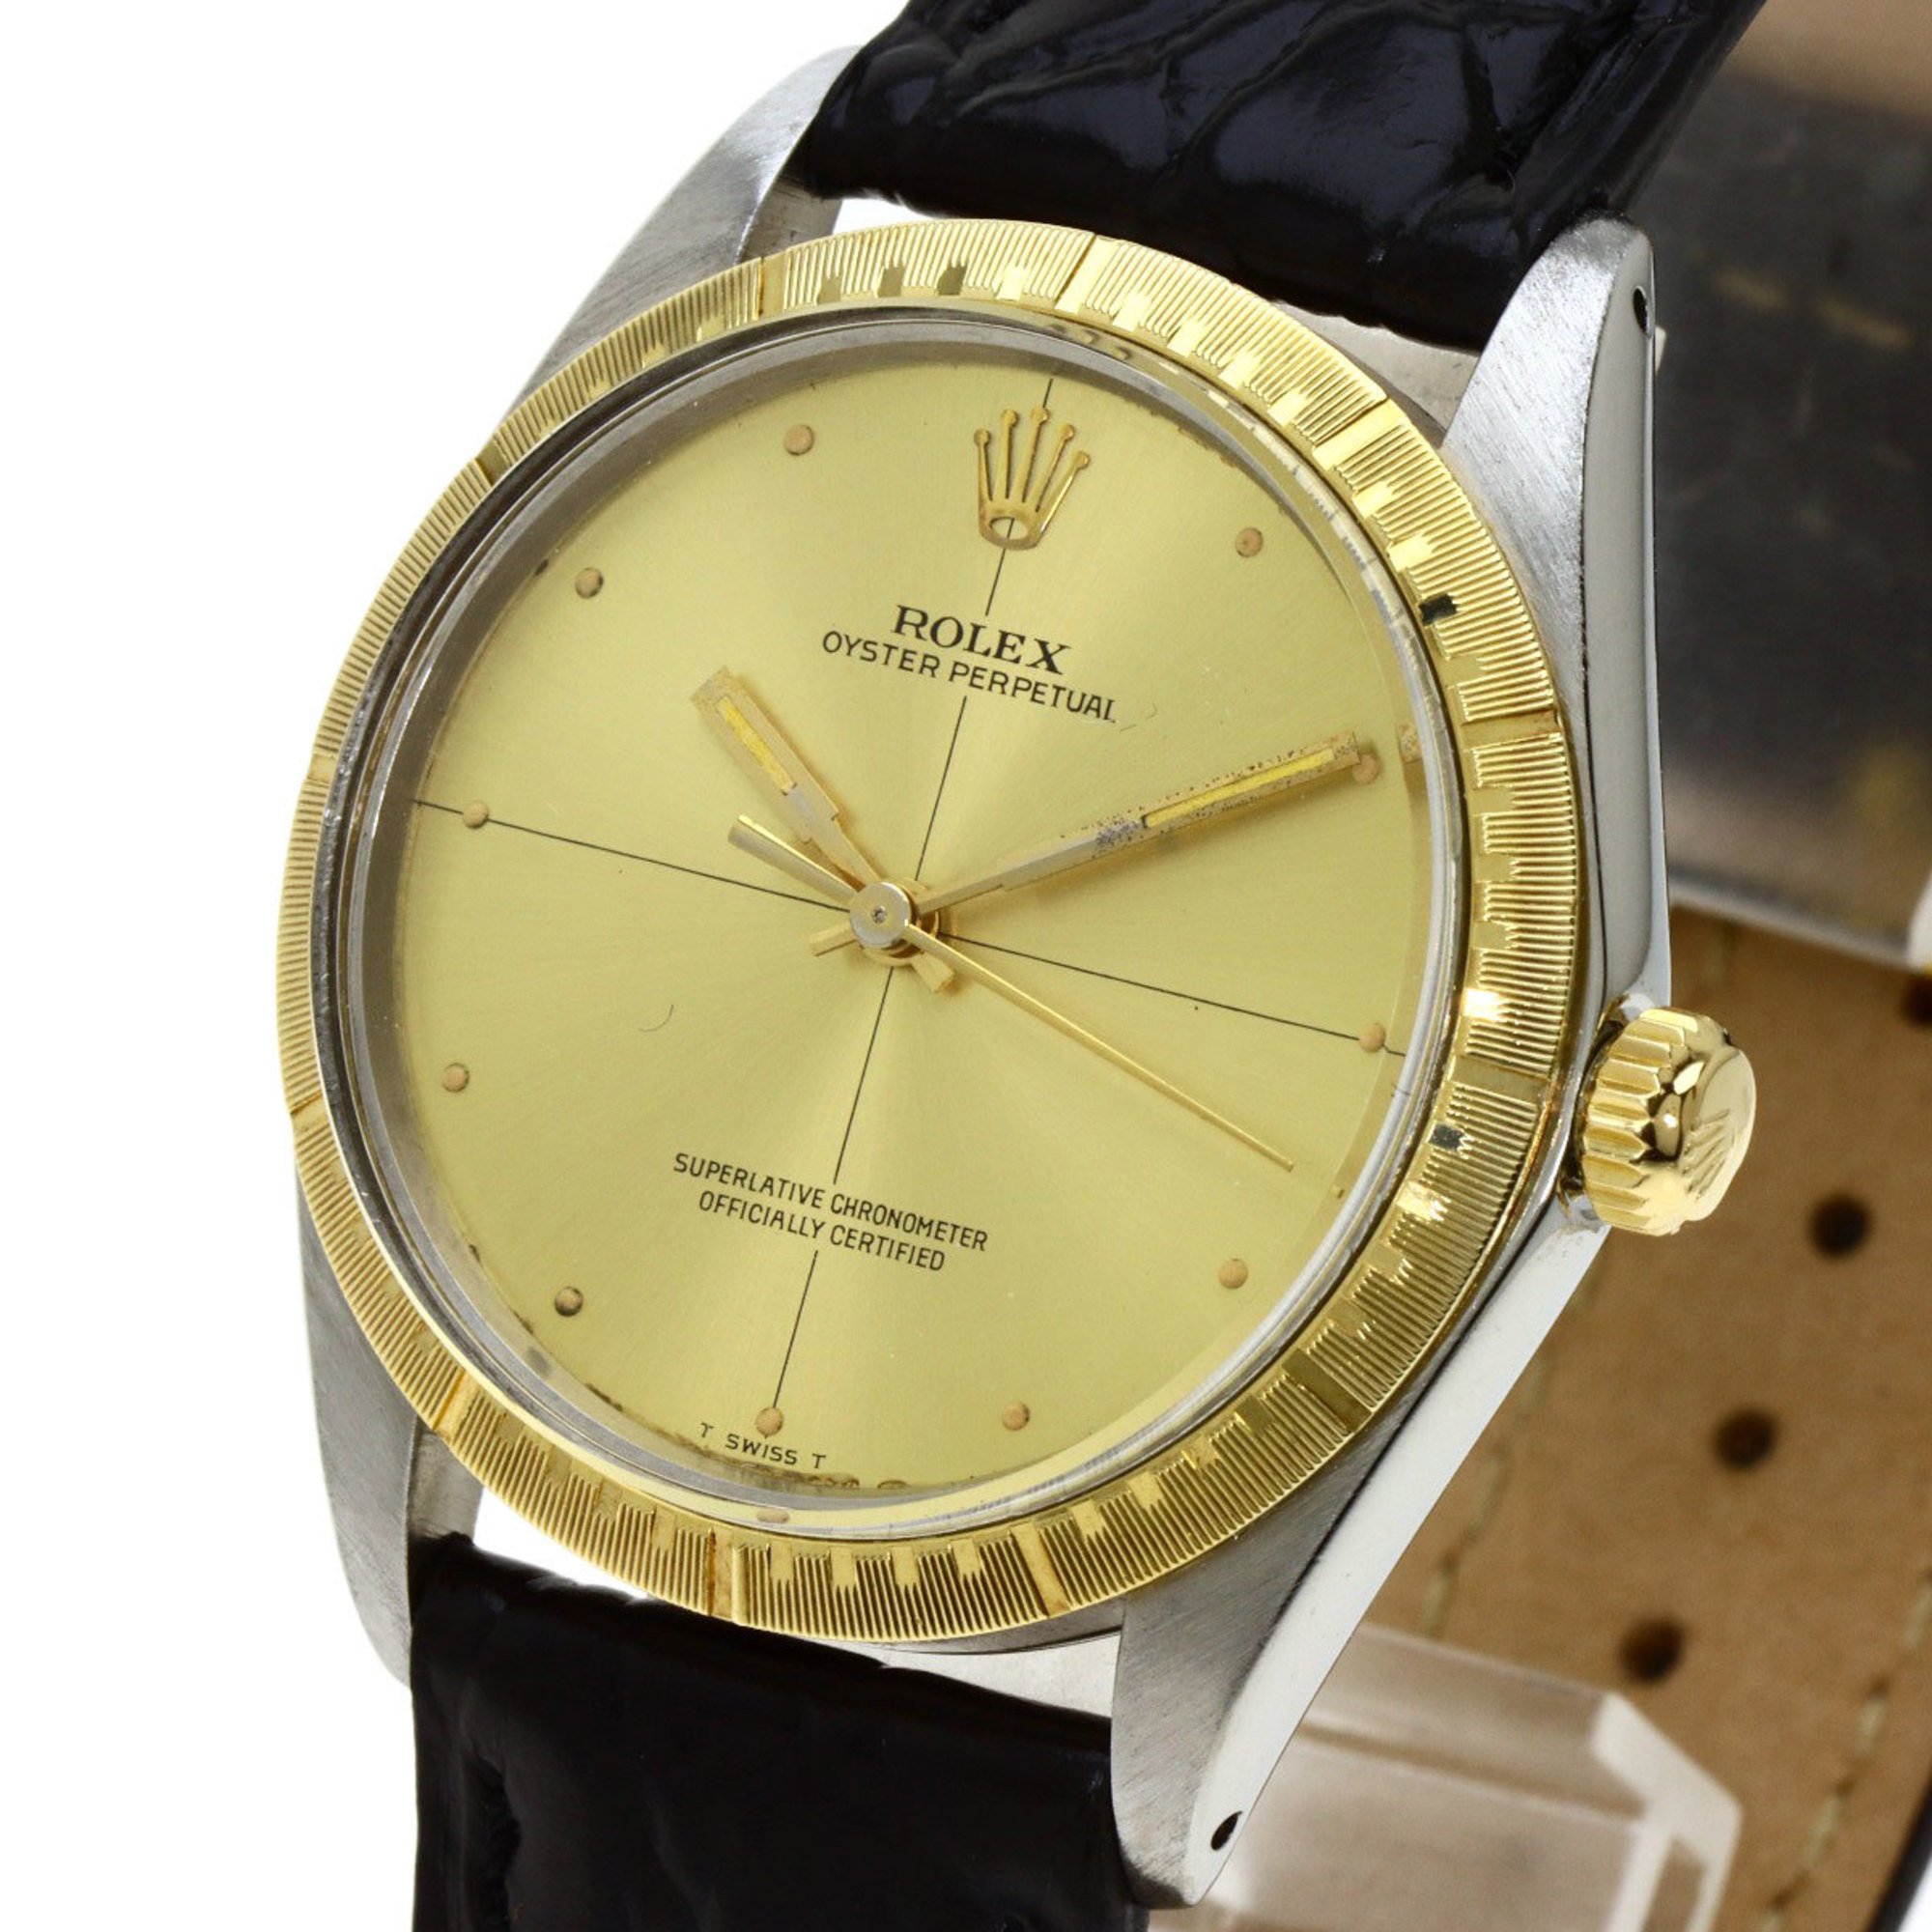 Rolex 1038 Oyster Perpetual 1967 watch stainless steel/leather men's